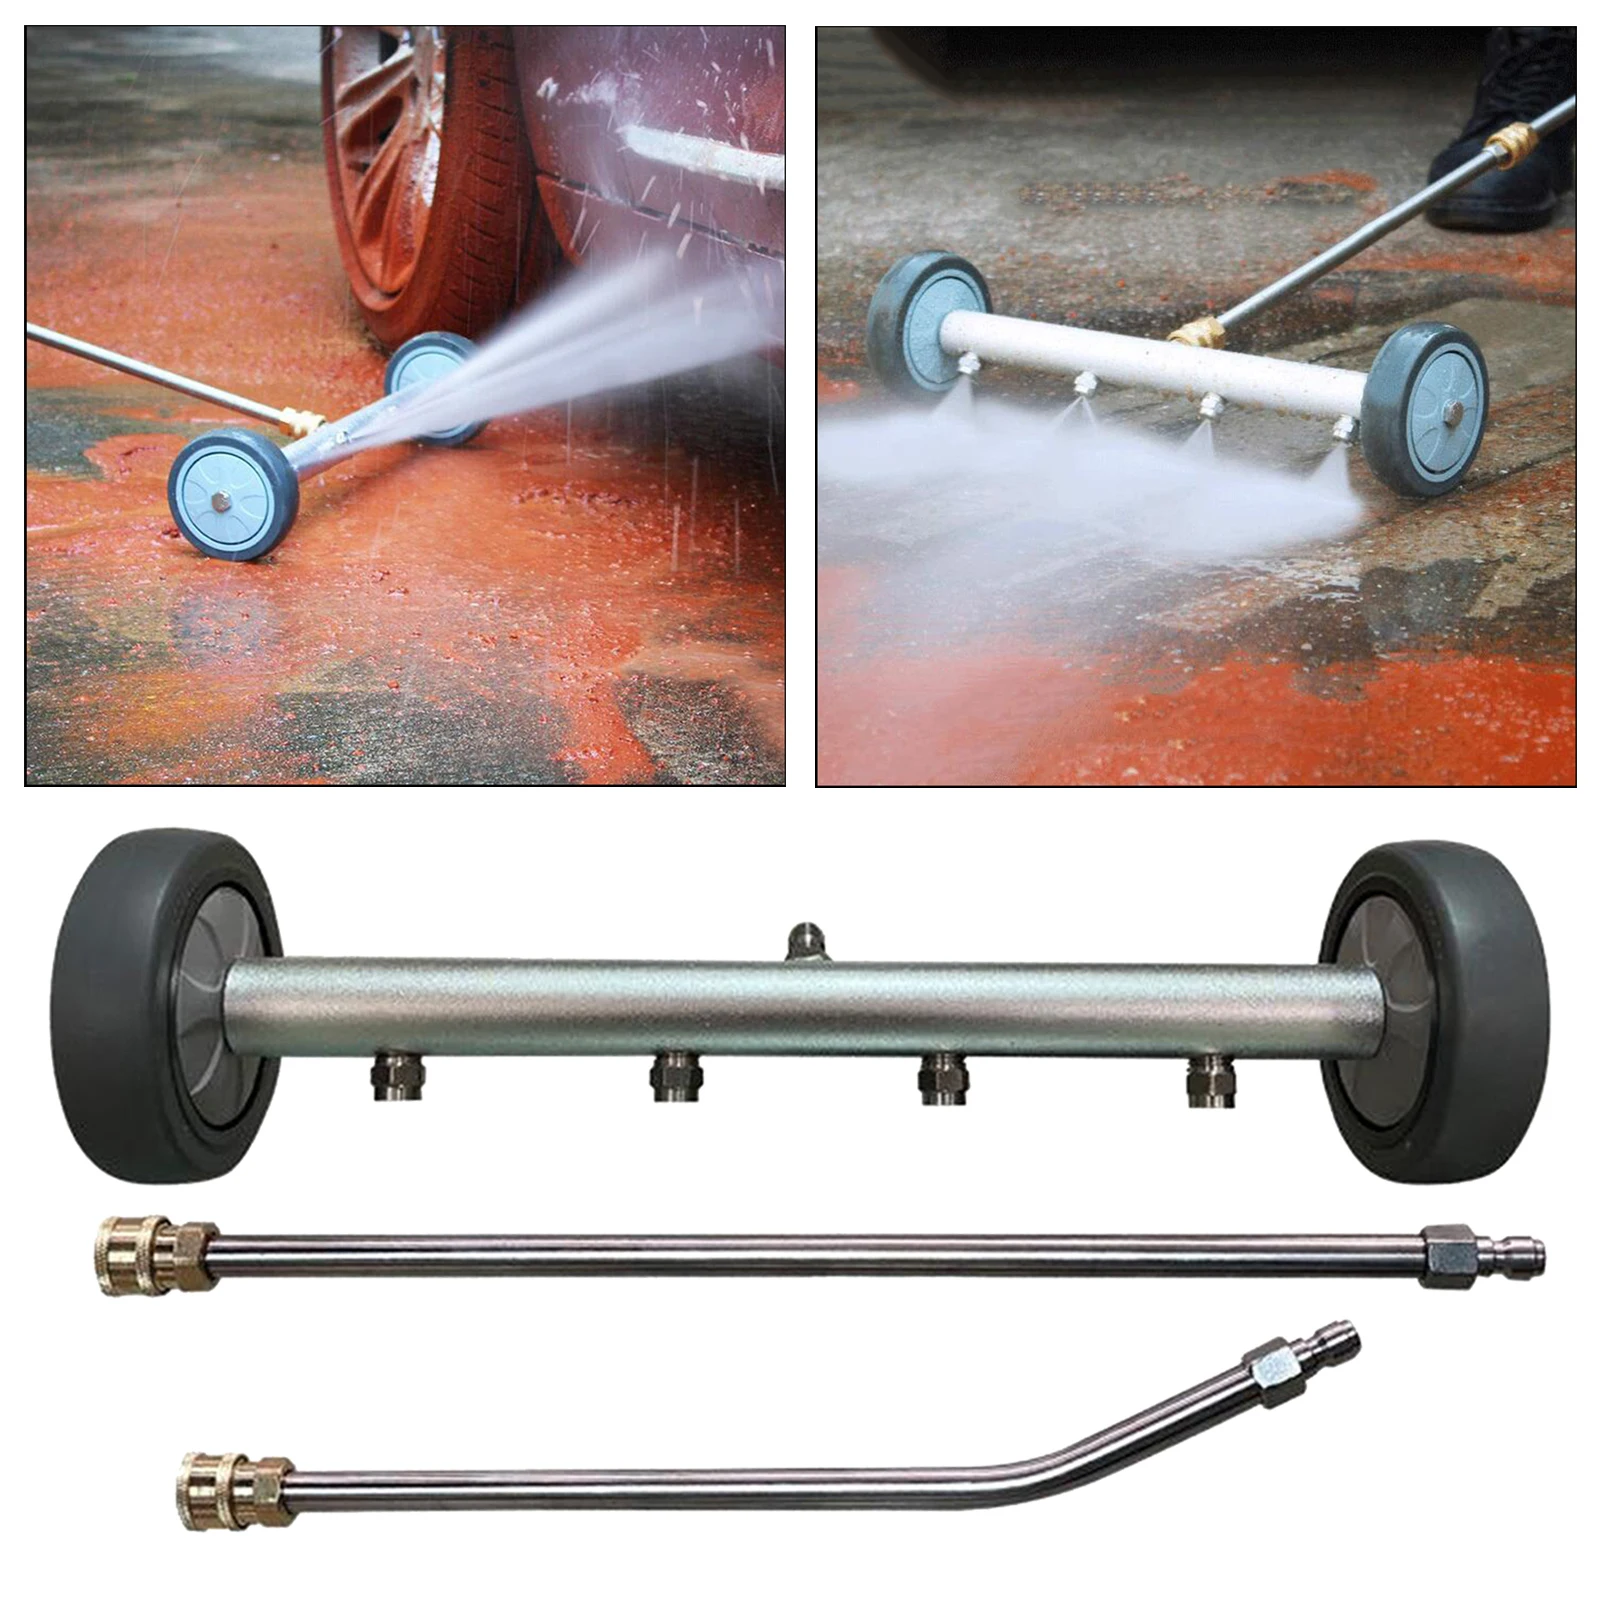 5000PSI 15inch Pressure Washer Undercarriage Cleaner Water Broom Car Chassis Wash 4 Spraye Nozzle